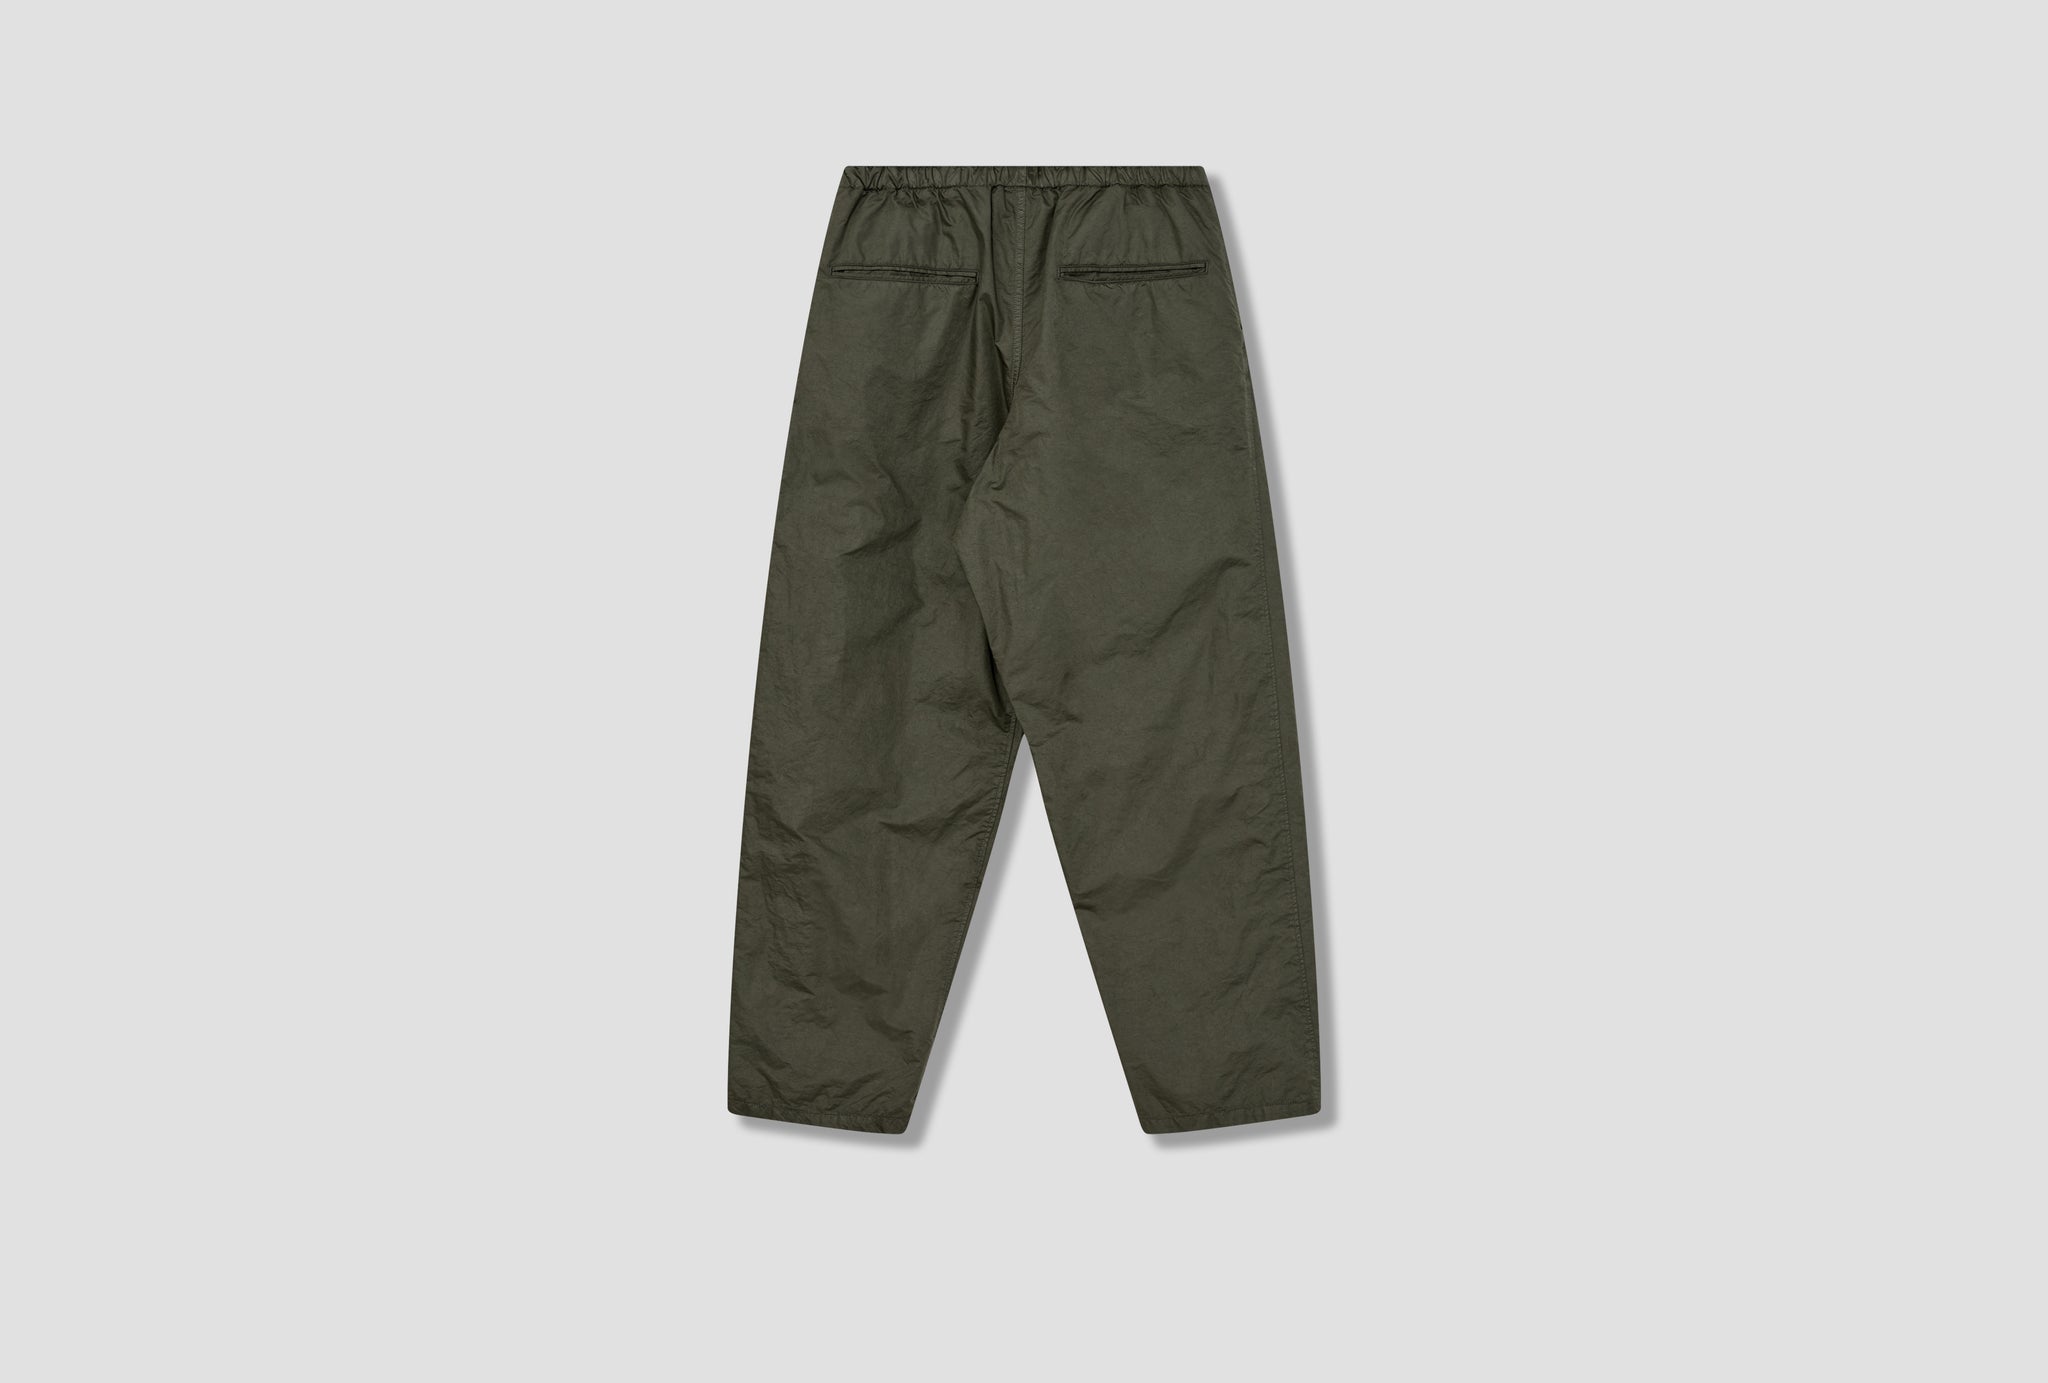 EMBEDED MILLTARY PANTS A10PT041 Grey